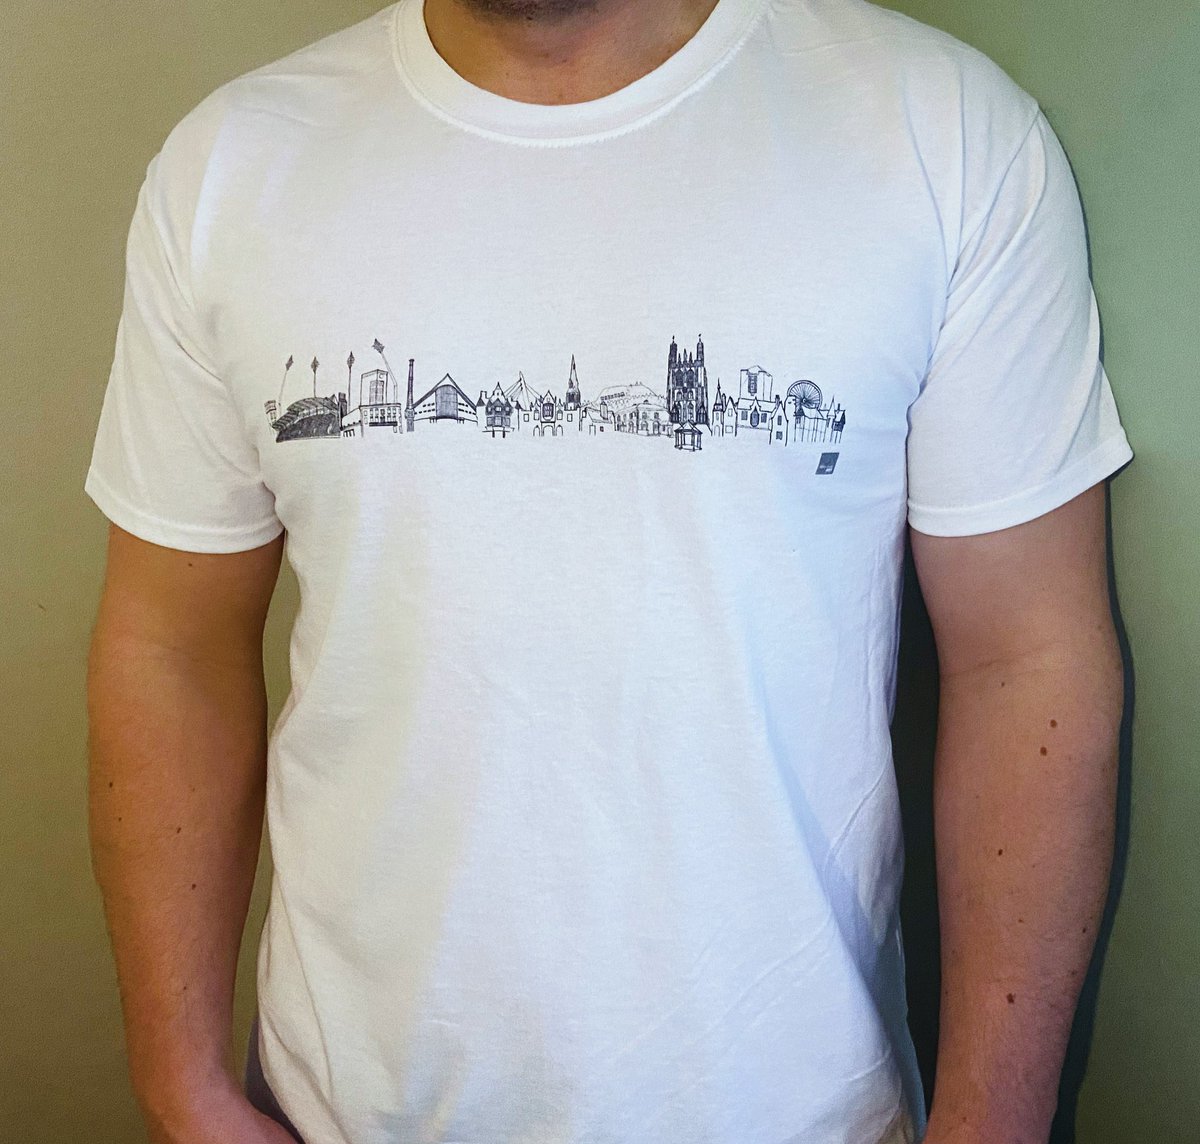 🚨 NEW PRODUCT LAUNCH 🚨 from Canvas to cotton my Wrexham Skyline on a TShirt! DM for details. #Wrexham @wrexham #Wrecsam